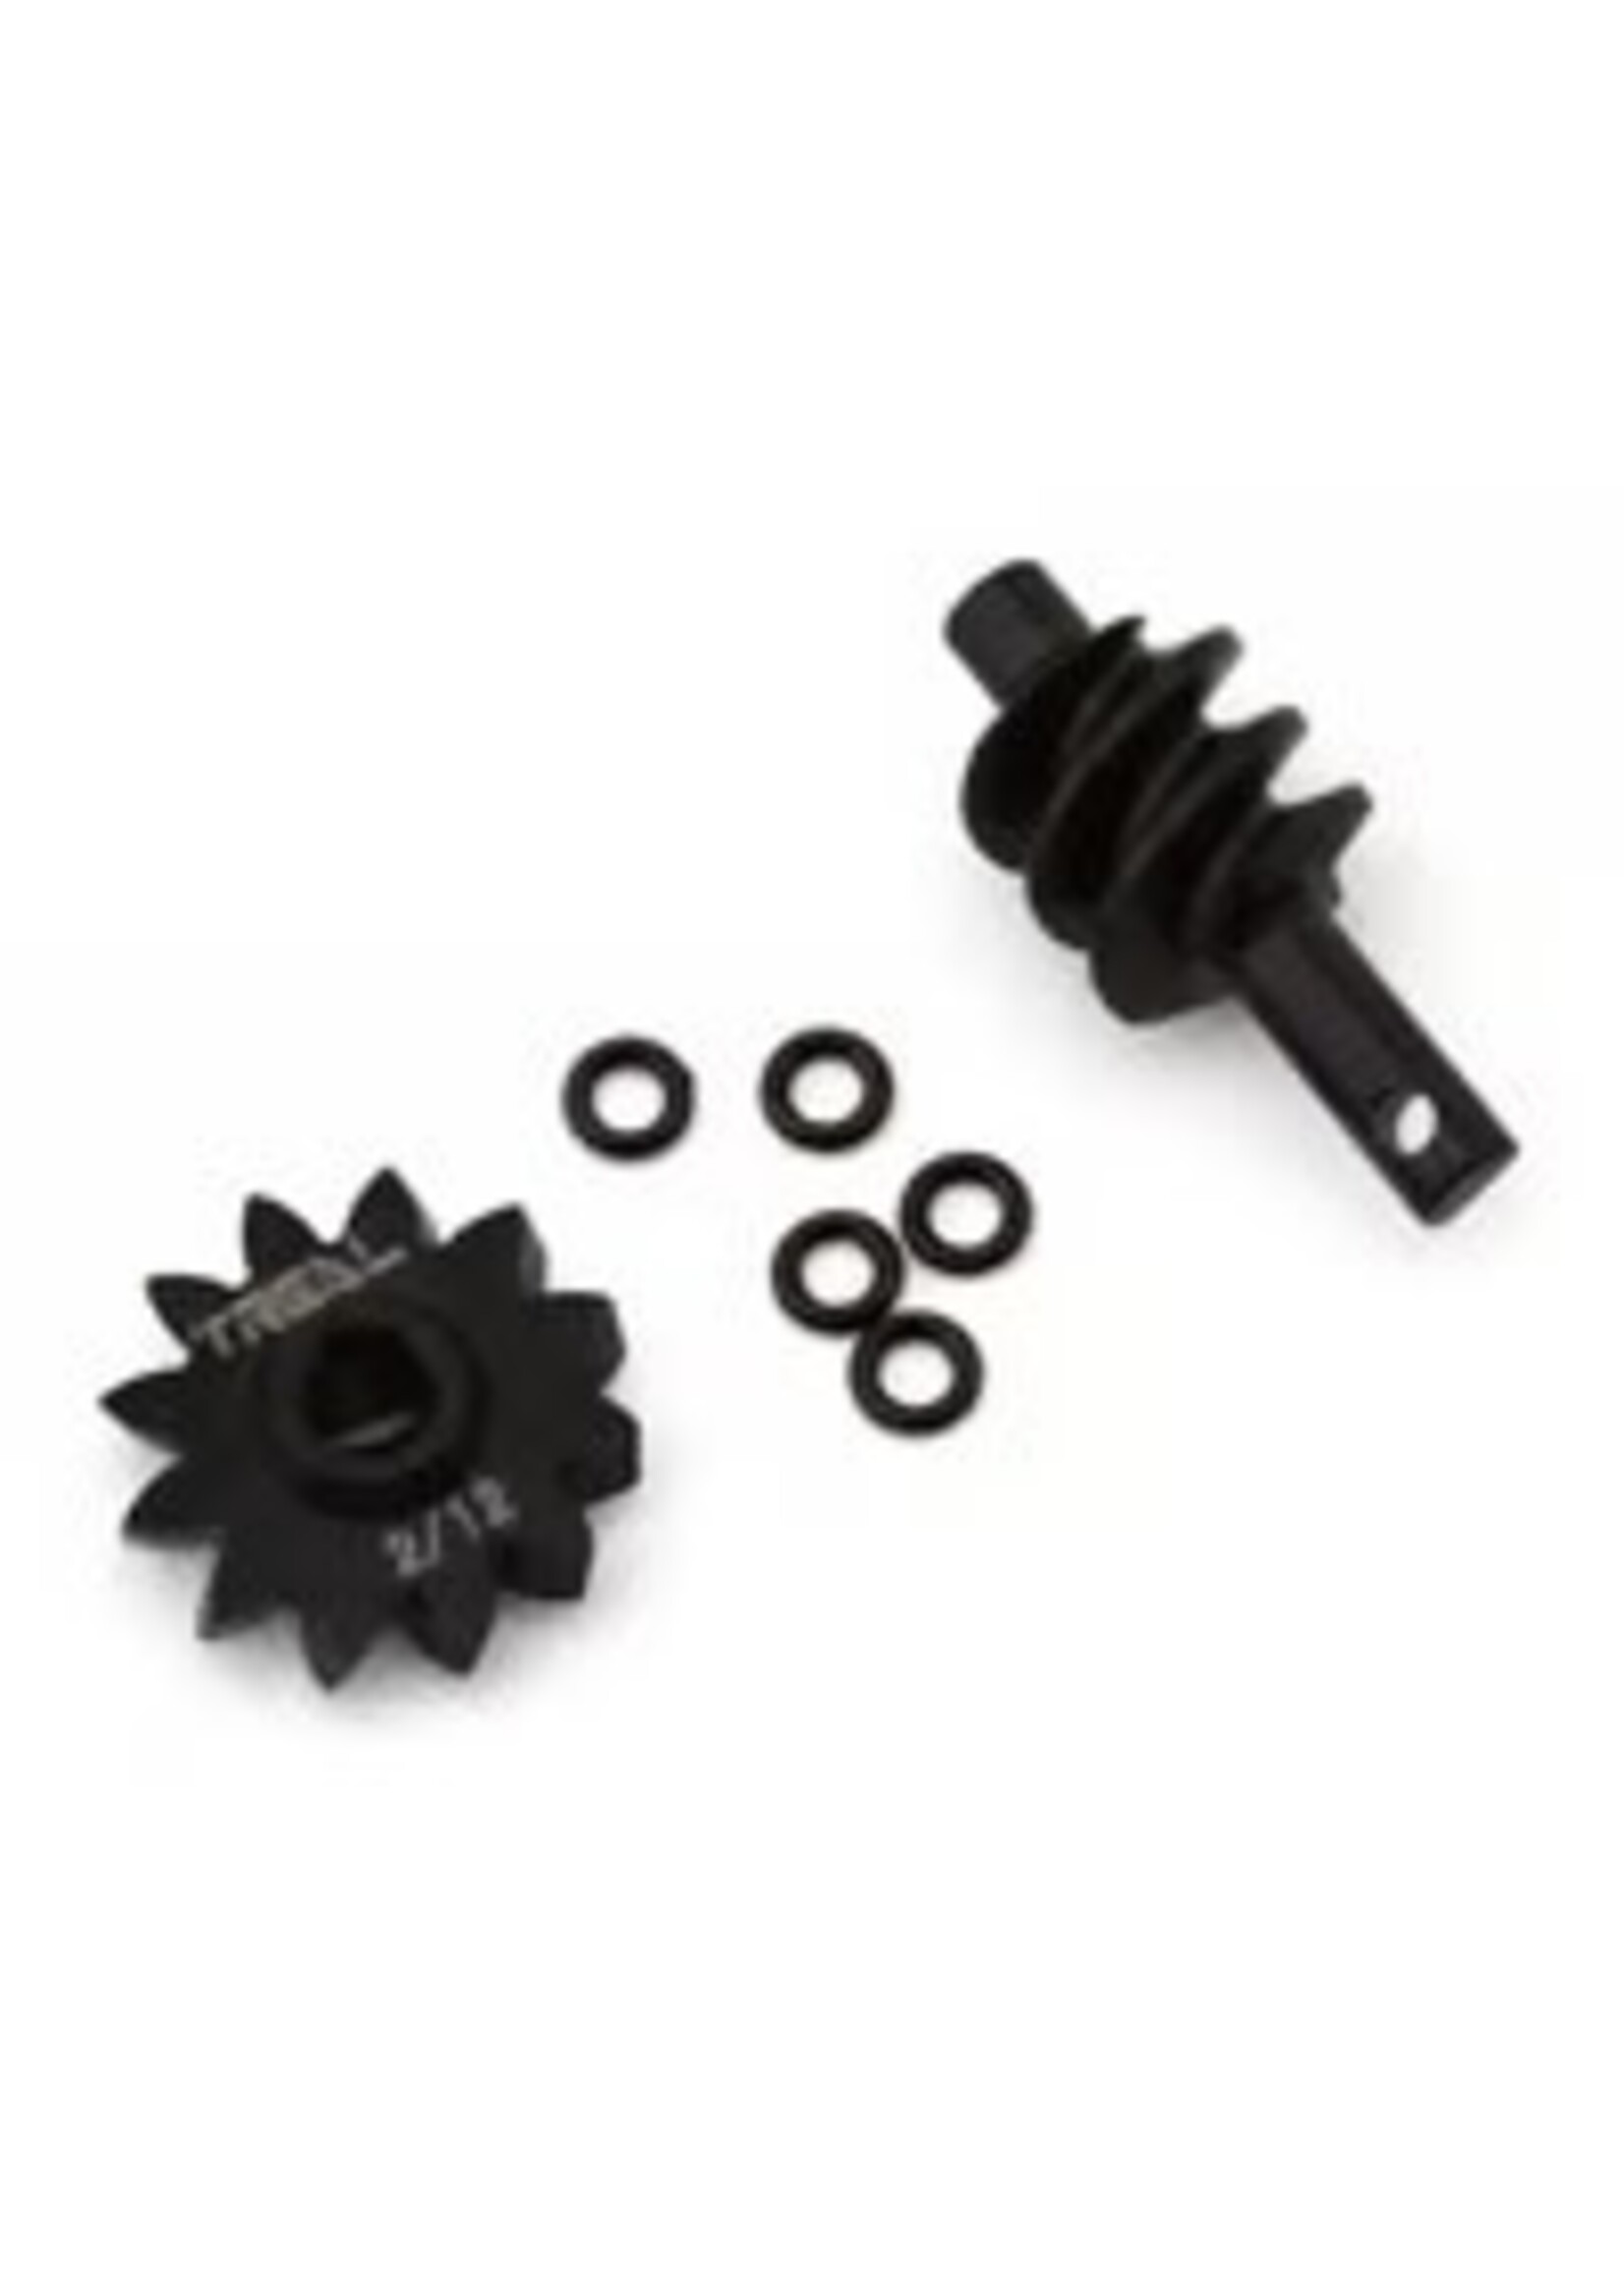 TREAL HOBBY Treal Hobby Axial SCX24 Steel Overdrive Differential Gears (2T/12T)